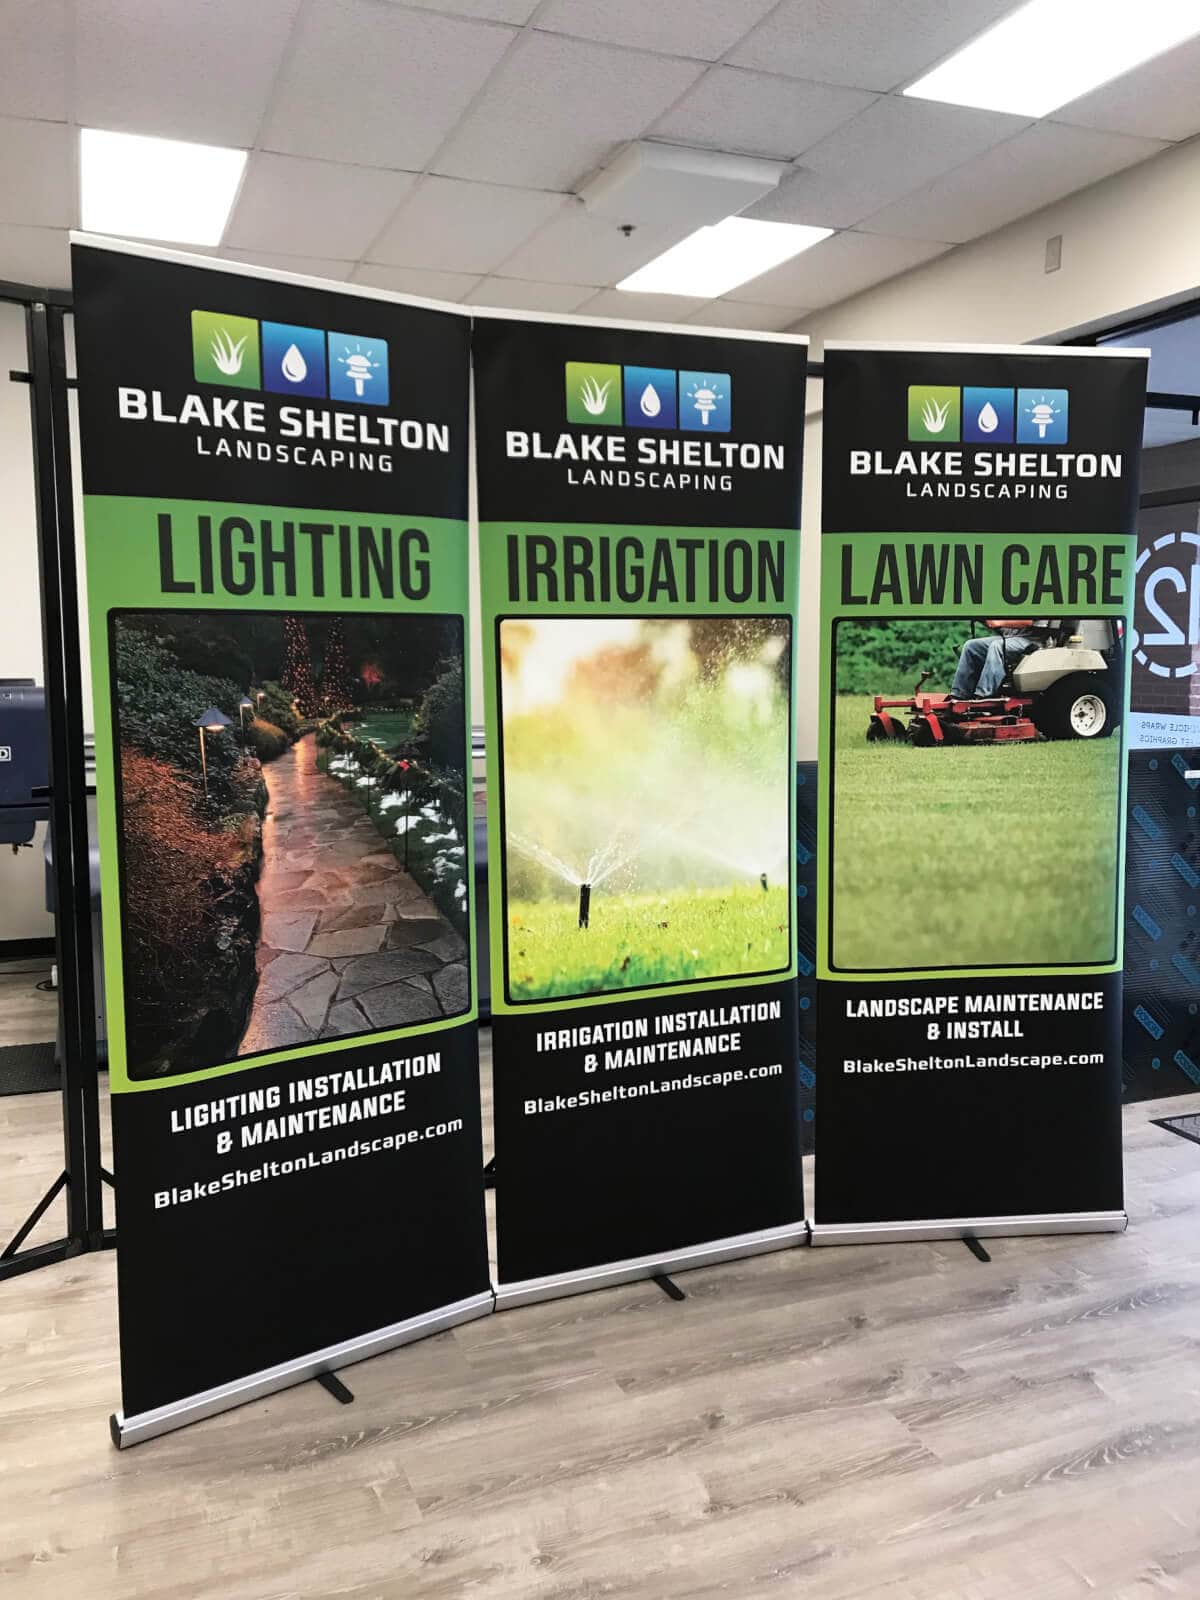 Custom retractable banners for Blake Shelton Landscaping by 12-Point SignWorks in Franklin, TN.